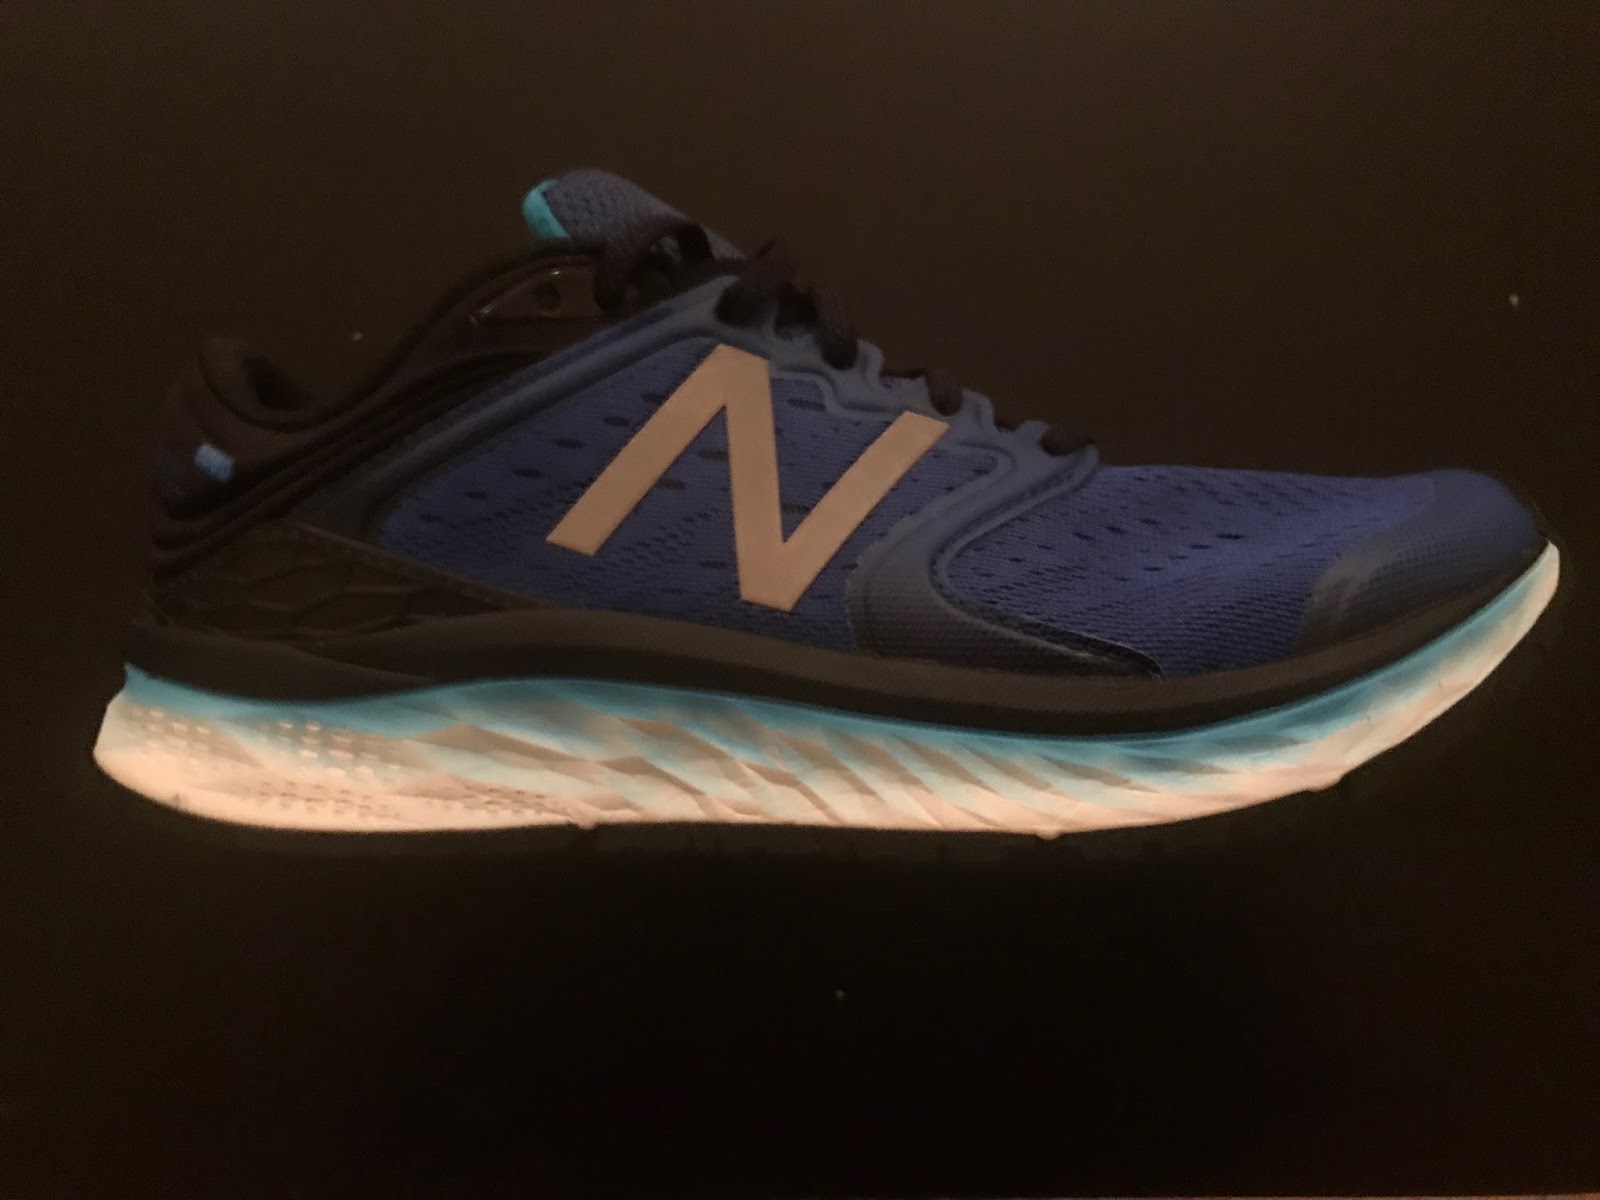 Road Trail Run: New Balance Fresh Foam 1080v8 Review, Comparisons to Brooks Levitate and Saucony Triumph ISO